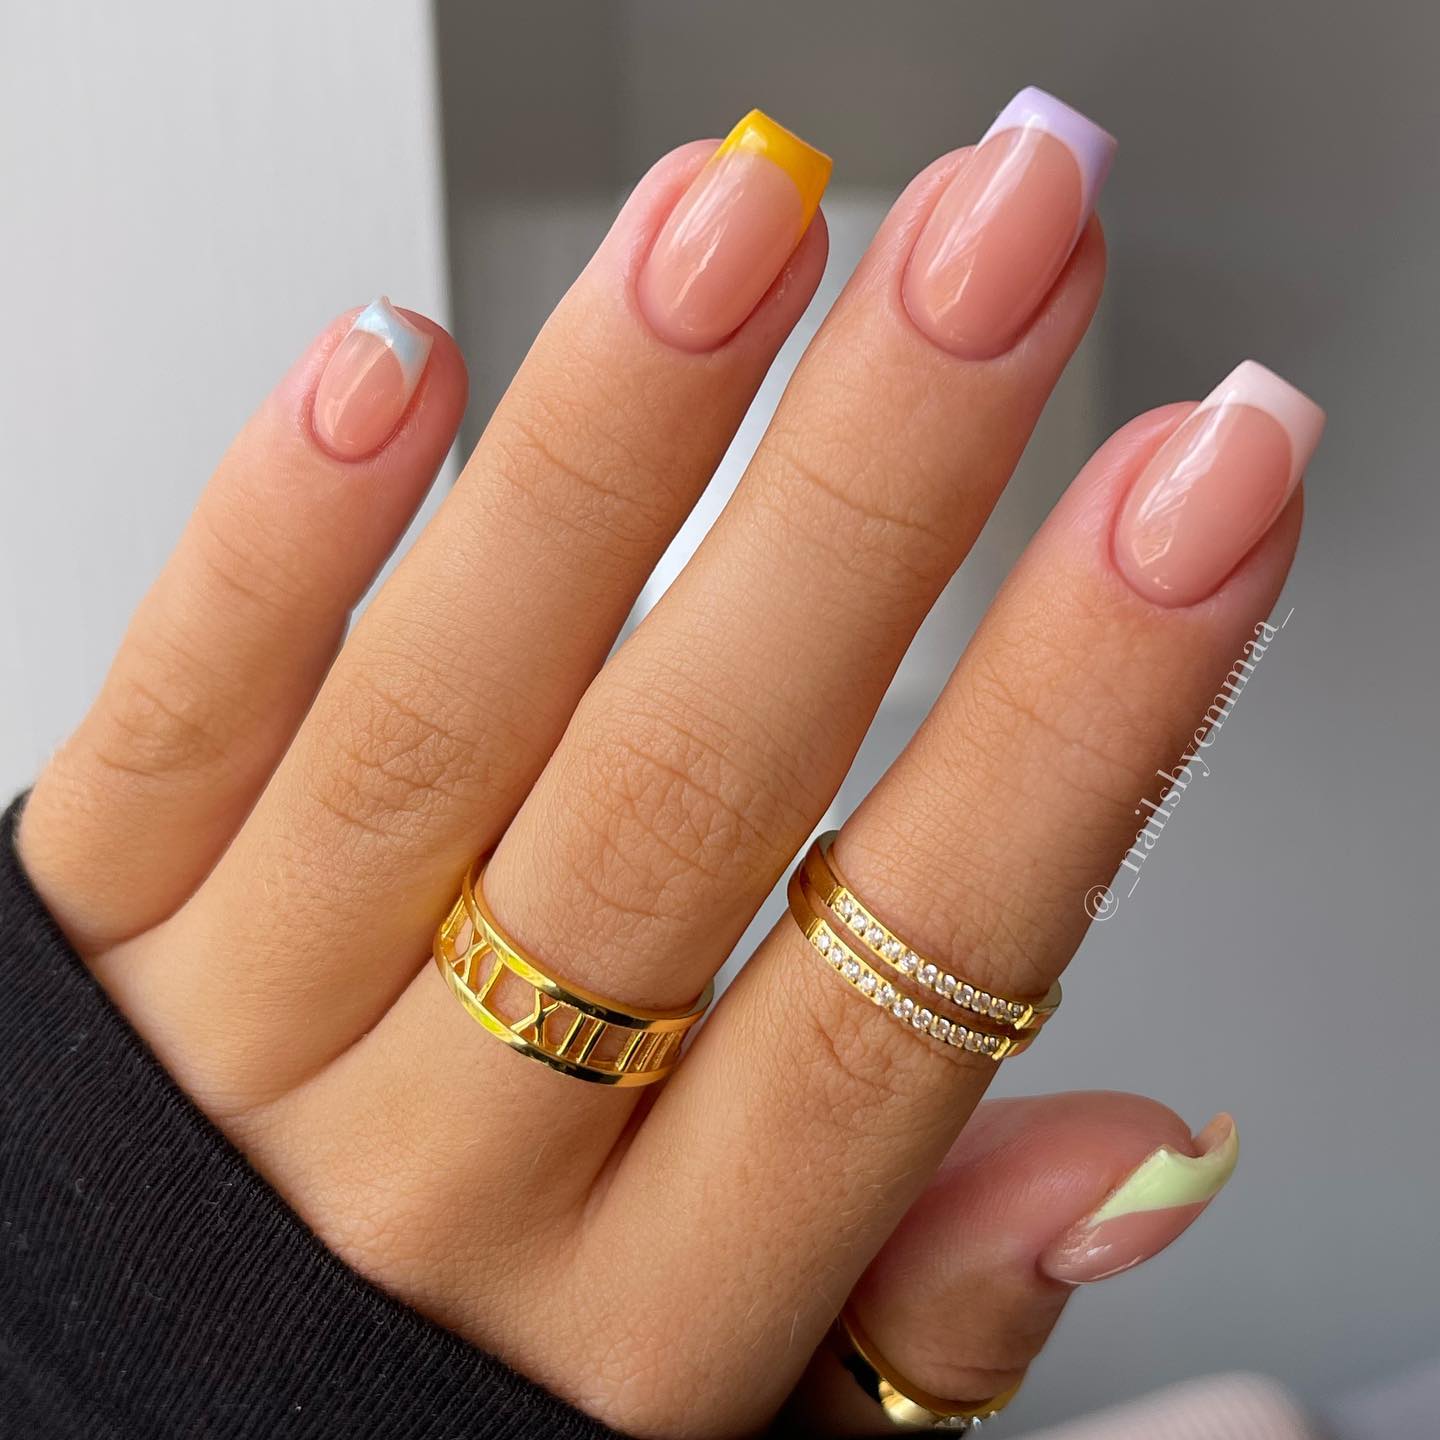 50 Best Nail Designs Trends To Try Out In 2022 images 45